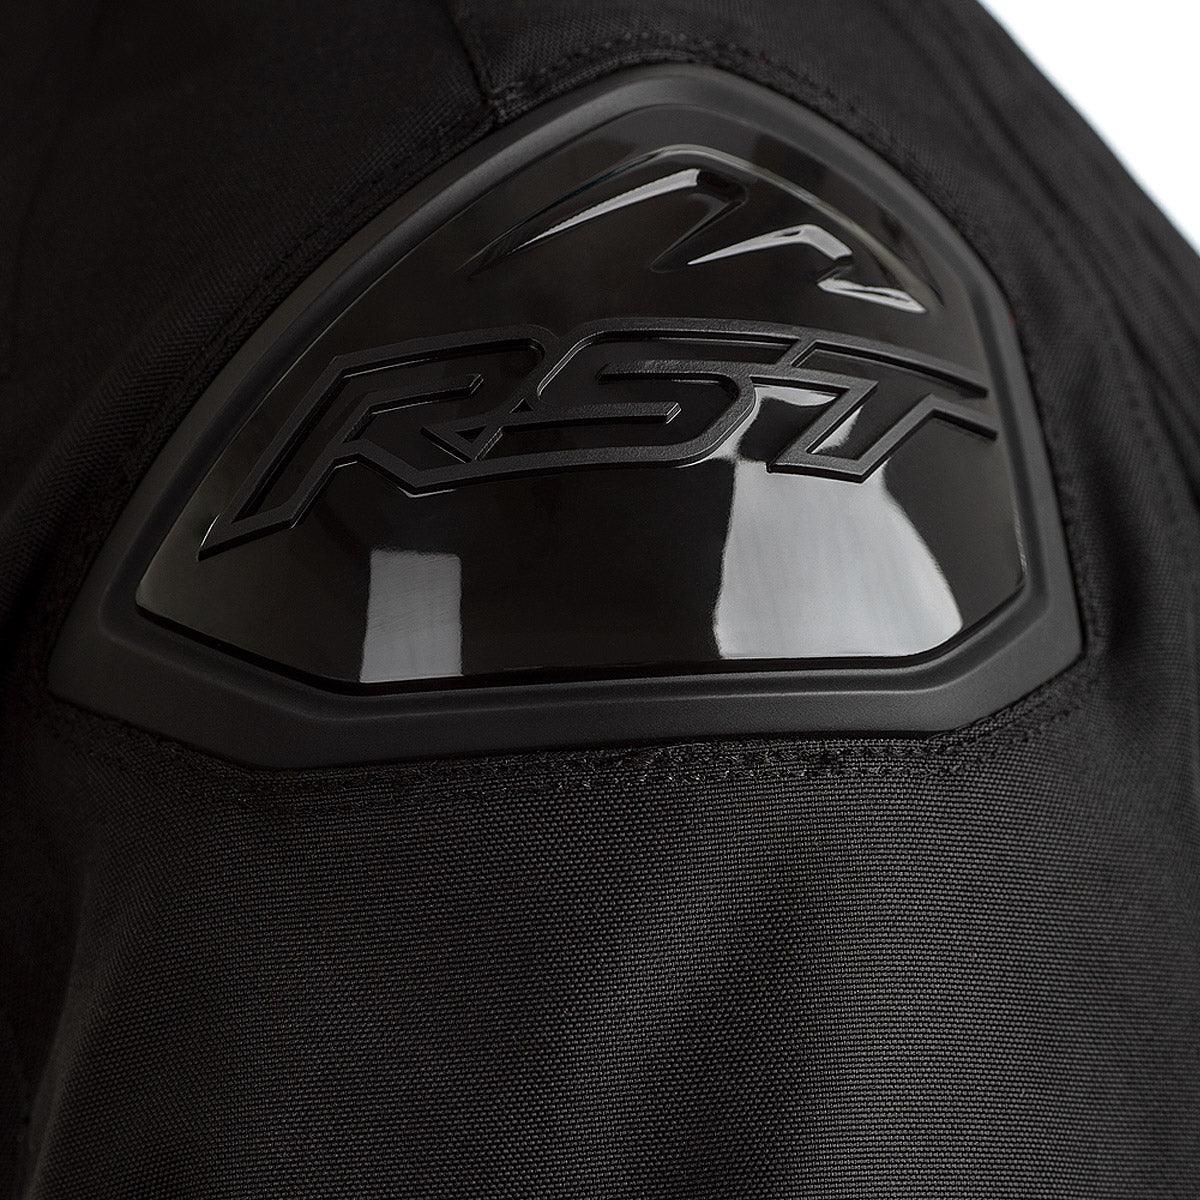 RST Tractech Evo 4 Textile Jacket CE WP Black - Motorcycle Clothing